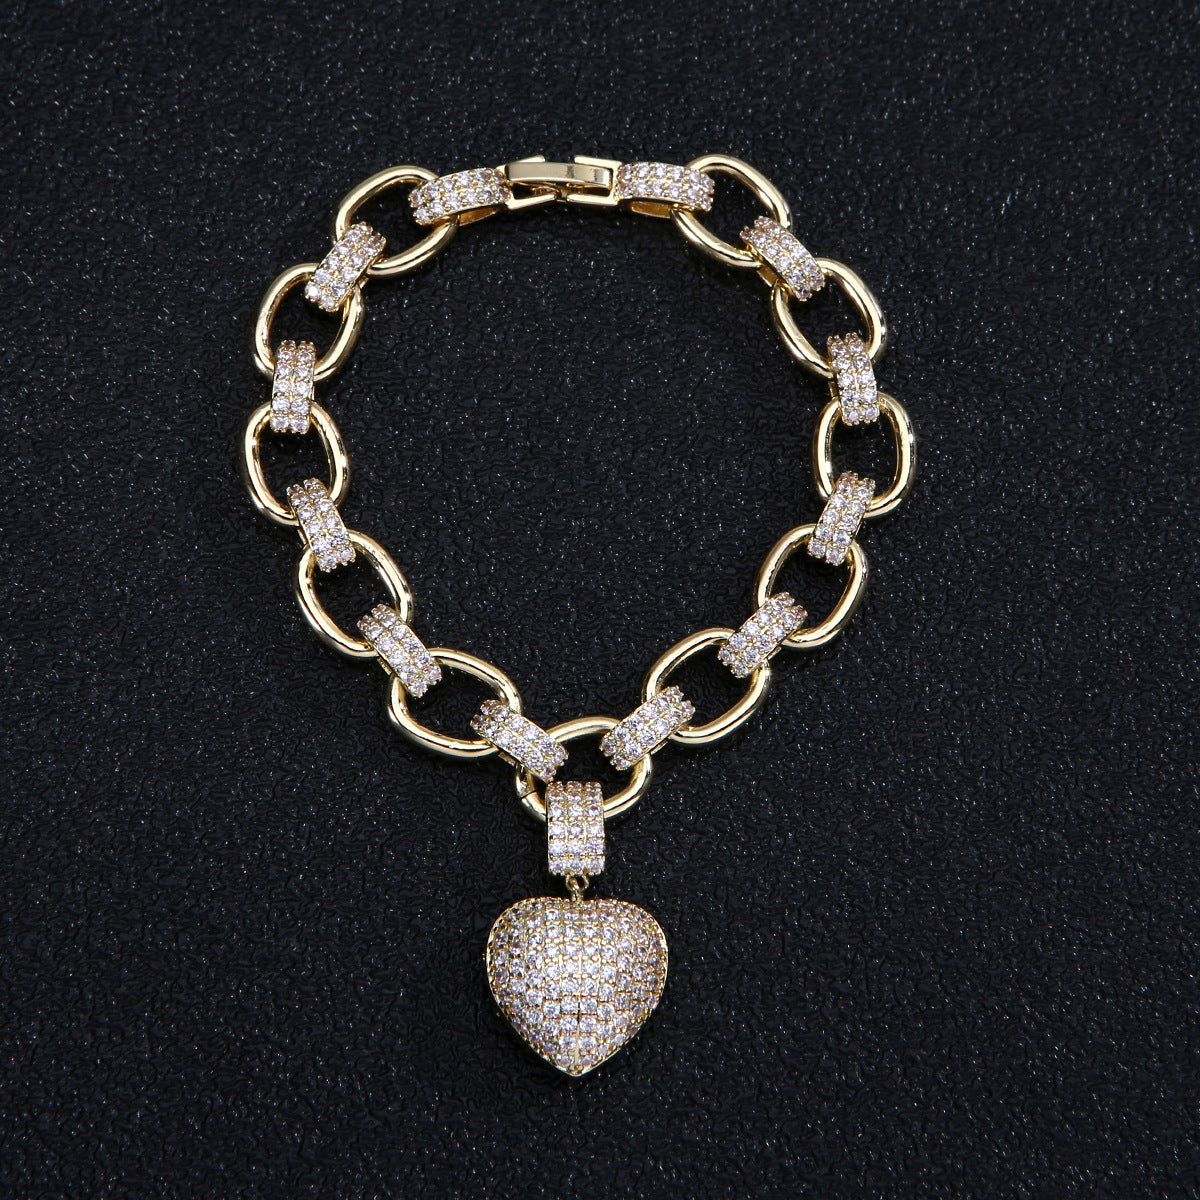 Luxury Cubic Zirconia Bracelet and Necklace Set with Heart Charm